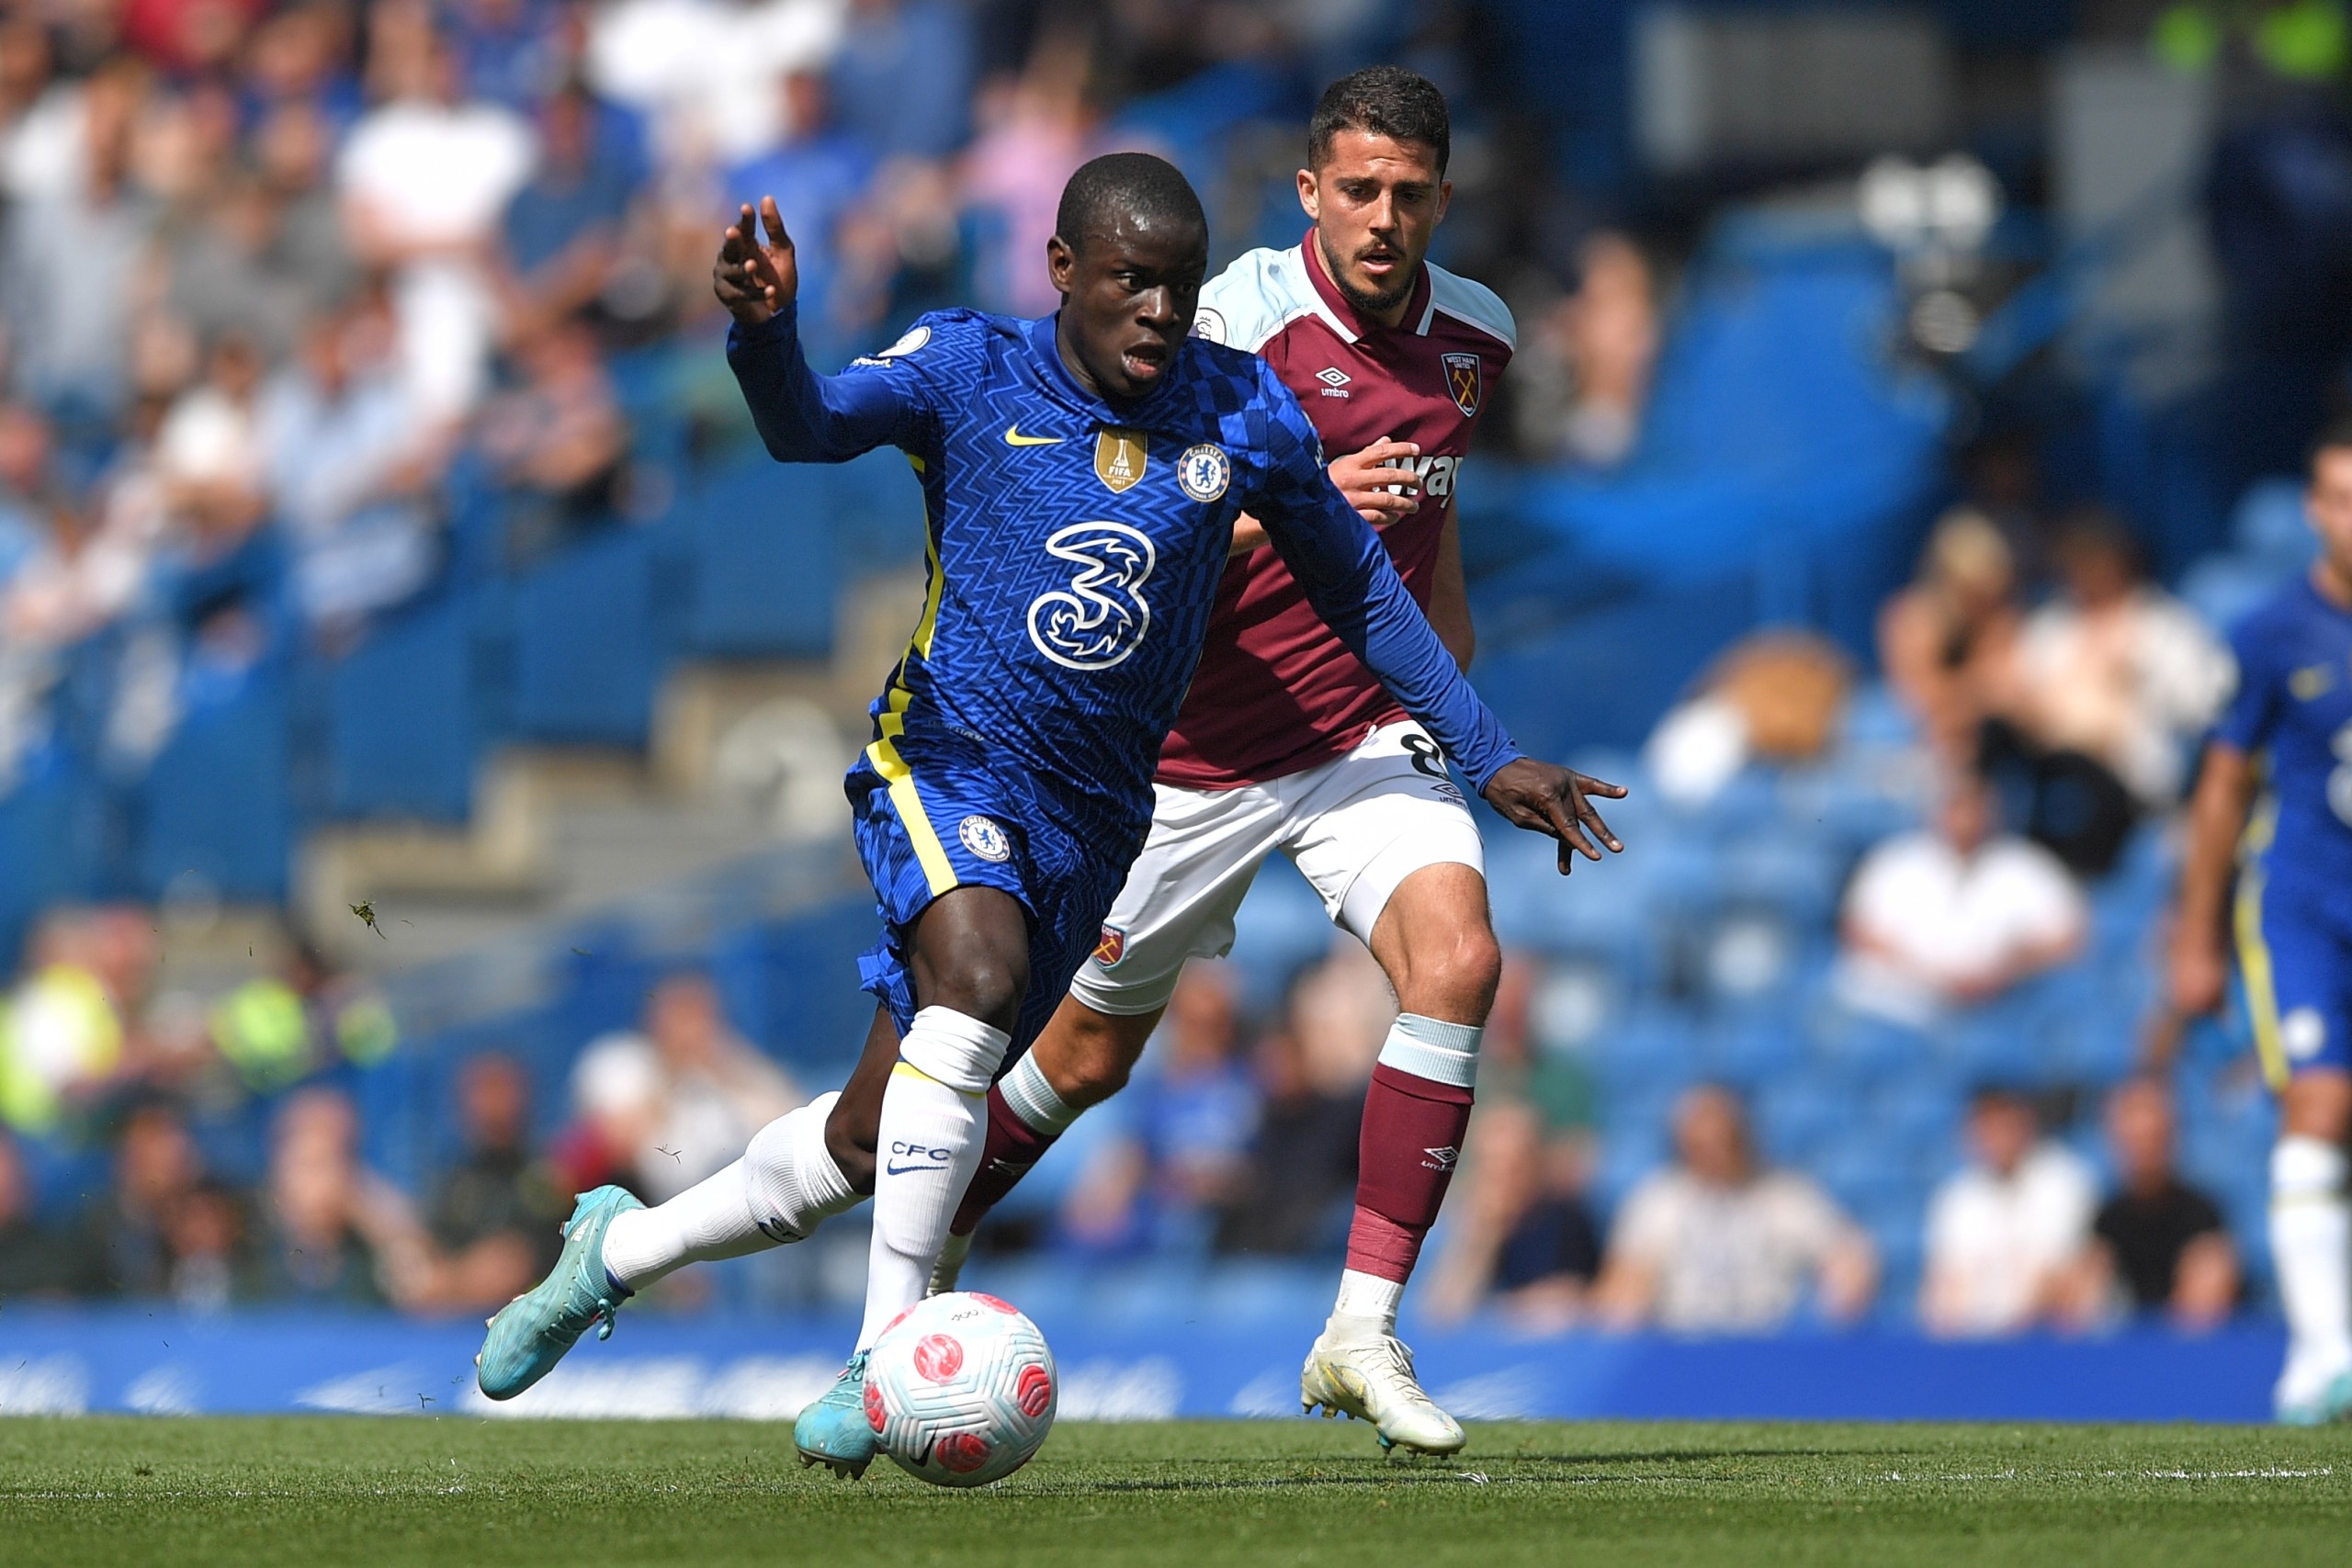 epa09906764 N'Golo Kante (L) of Chelsea in action against Pablo Fornals (R) of West Ham during the English Premier League soccer match between Chelsea FC and West Ham United in London, Britain, 24 April 2022.  EPA/VINCENT MIGNOTT EDITORIAL USE ONLY. No use with unauthorized audio, video, data, fixture lists, club/league logos or 'live' services. Online in-match use limited to 120 images, no video emulation. No use in betting, games or single club/league/player publications